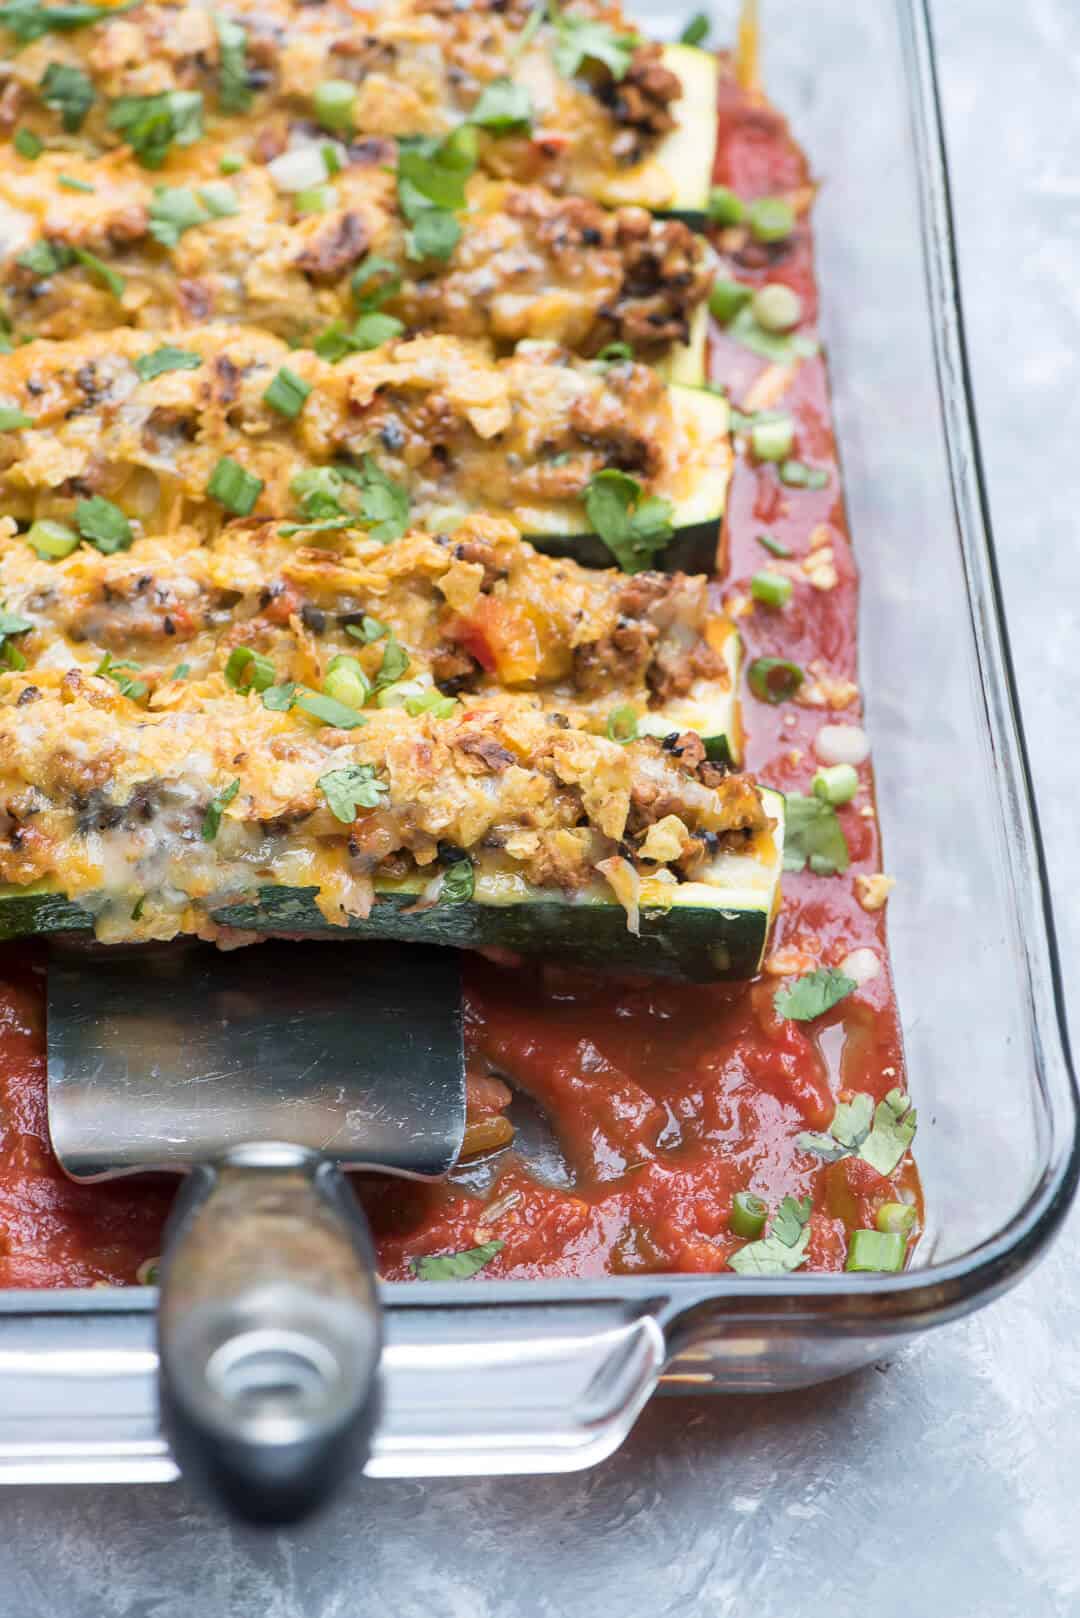 A spatula lifts one of the zucchini boats from the casserole dish.